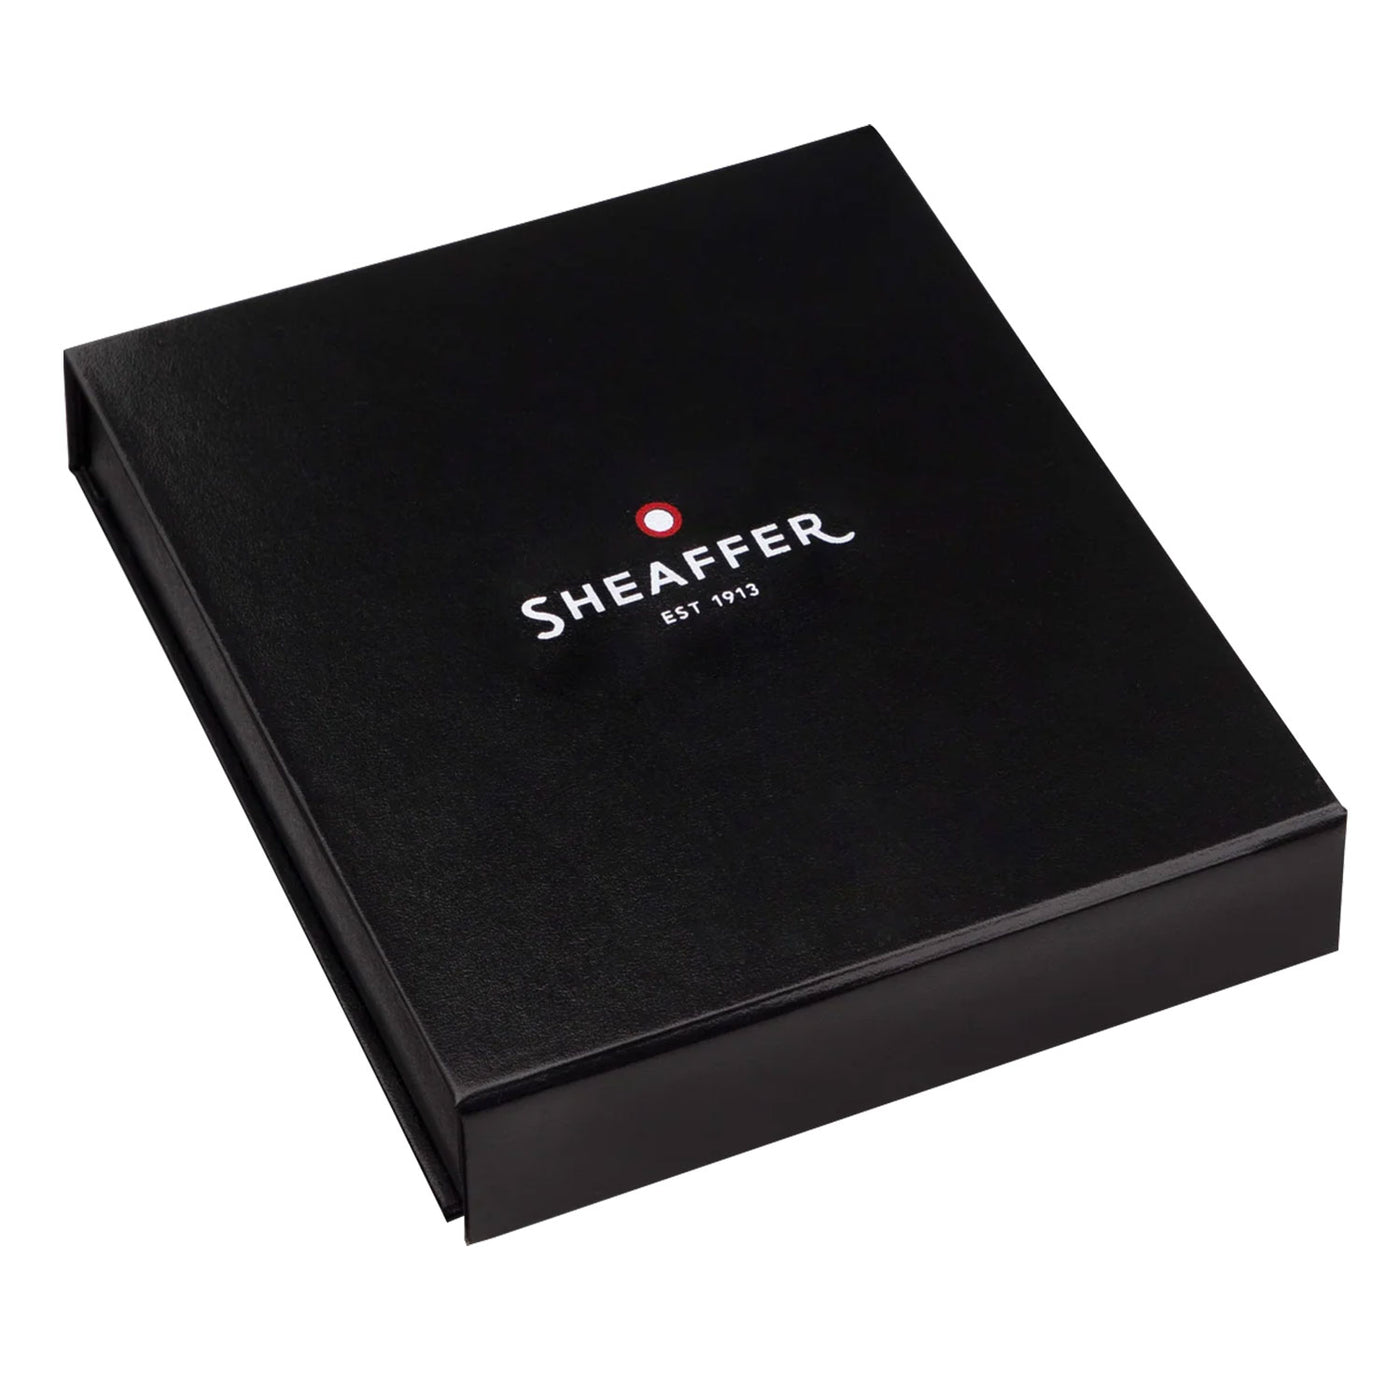 Sheaffer Gift Set - 100 Series Glossy Blue CT Ball Pen with Business Card Holder